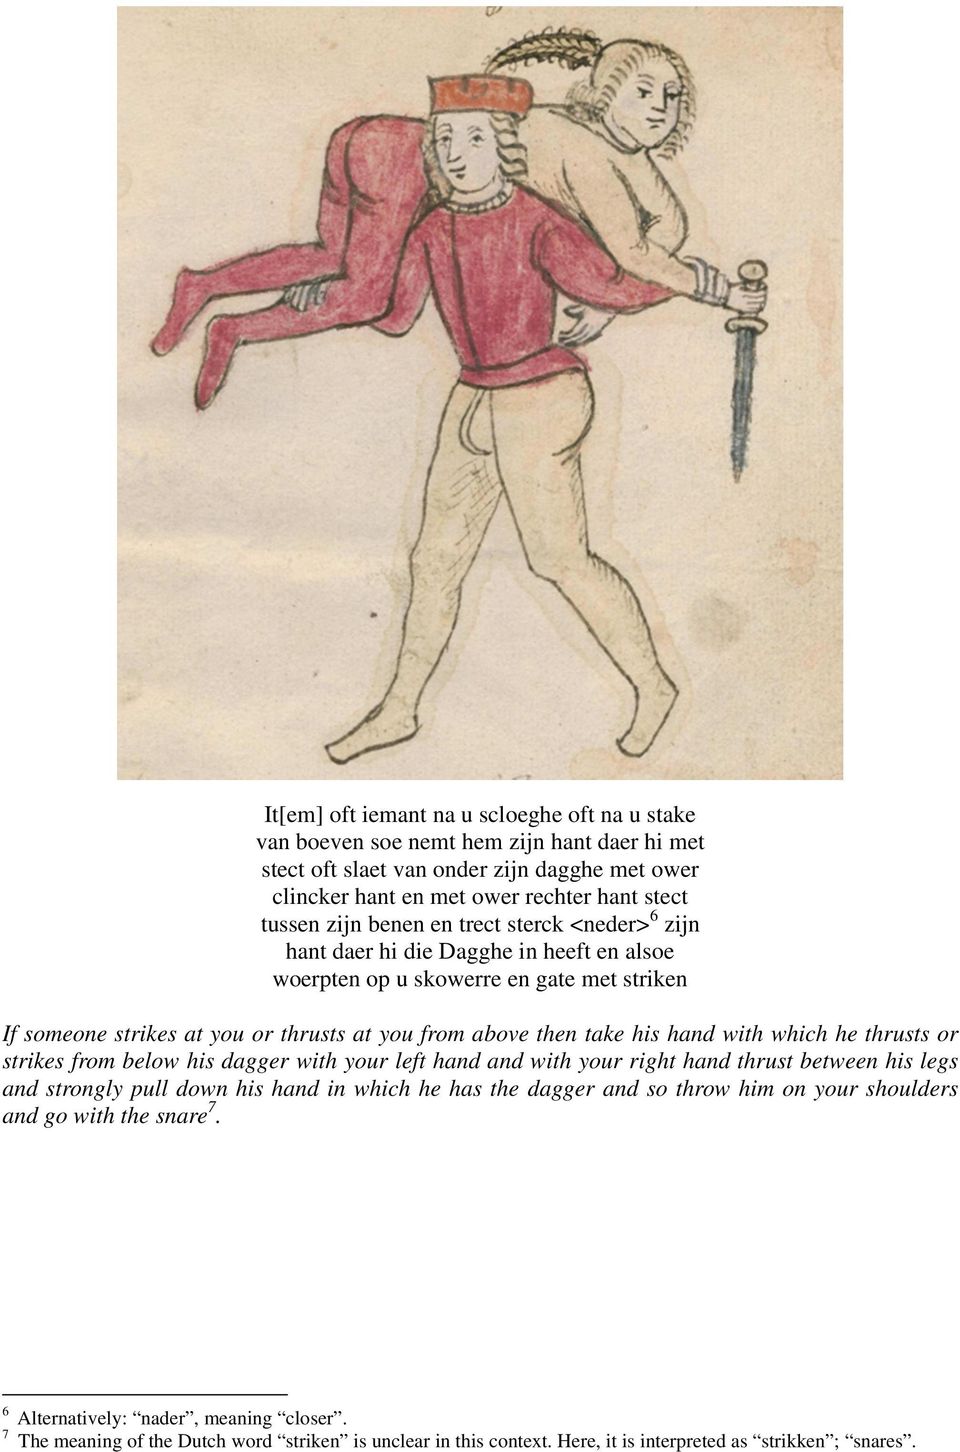 with which he thrusts or strikes from below his dagger with your left hand and with your right hand thrust between his legs and strongly pull down his hand in which he has the dagger and so throw